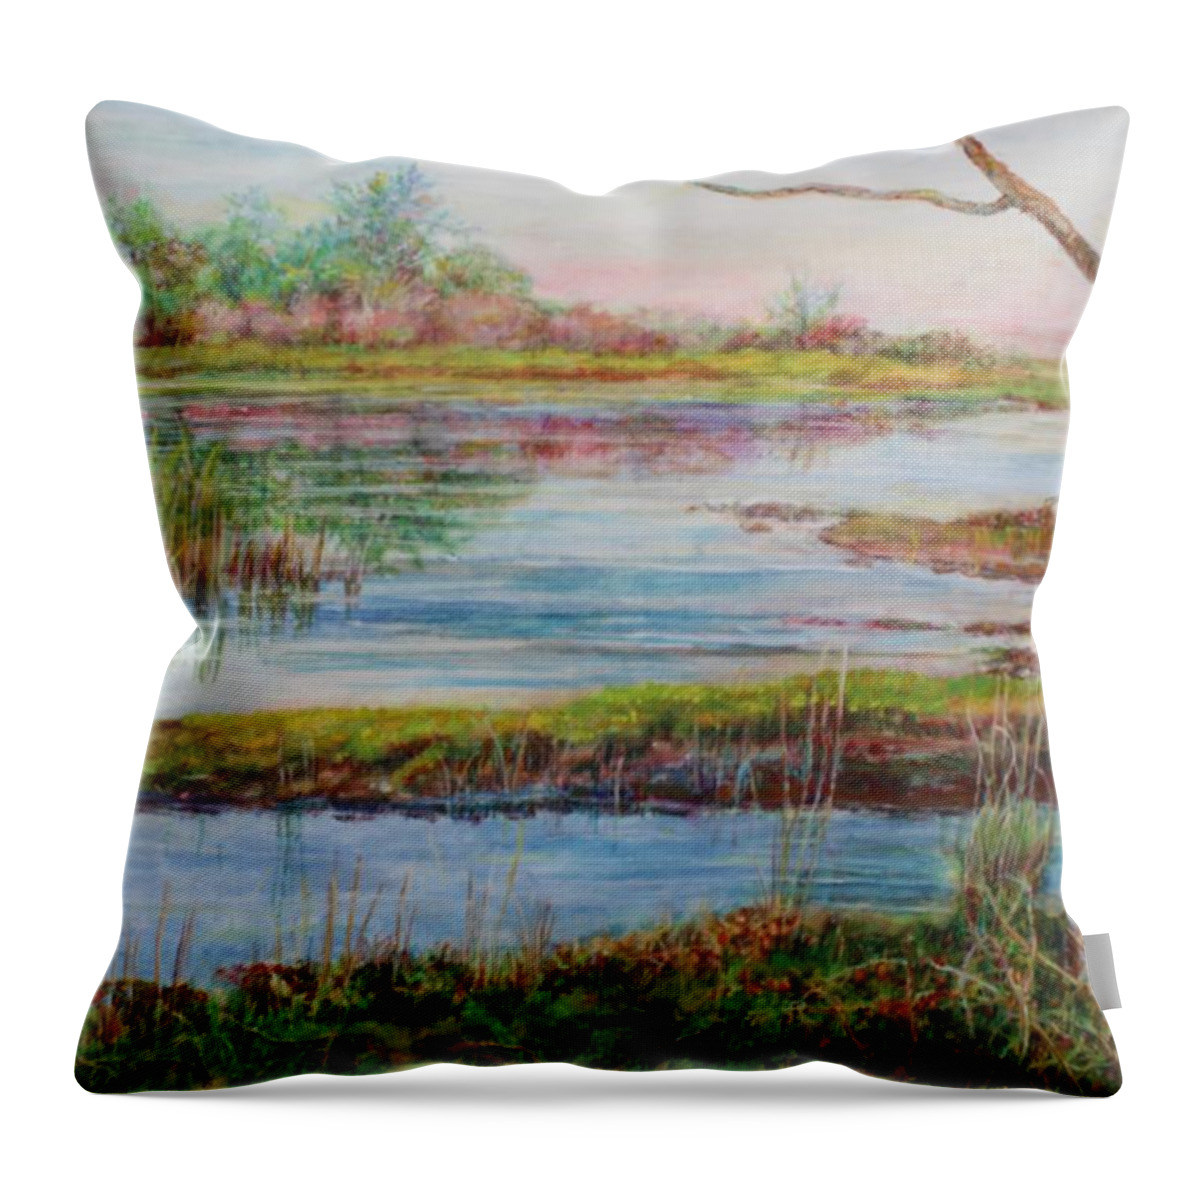 Seaside Throw Pillow featuring the painting Beach Scene by Veronica Cassell vaz